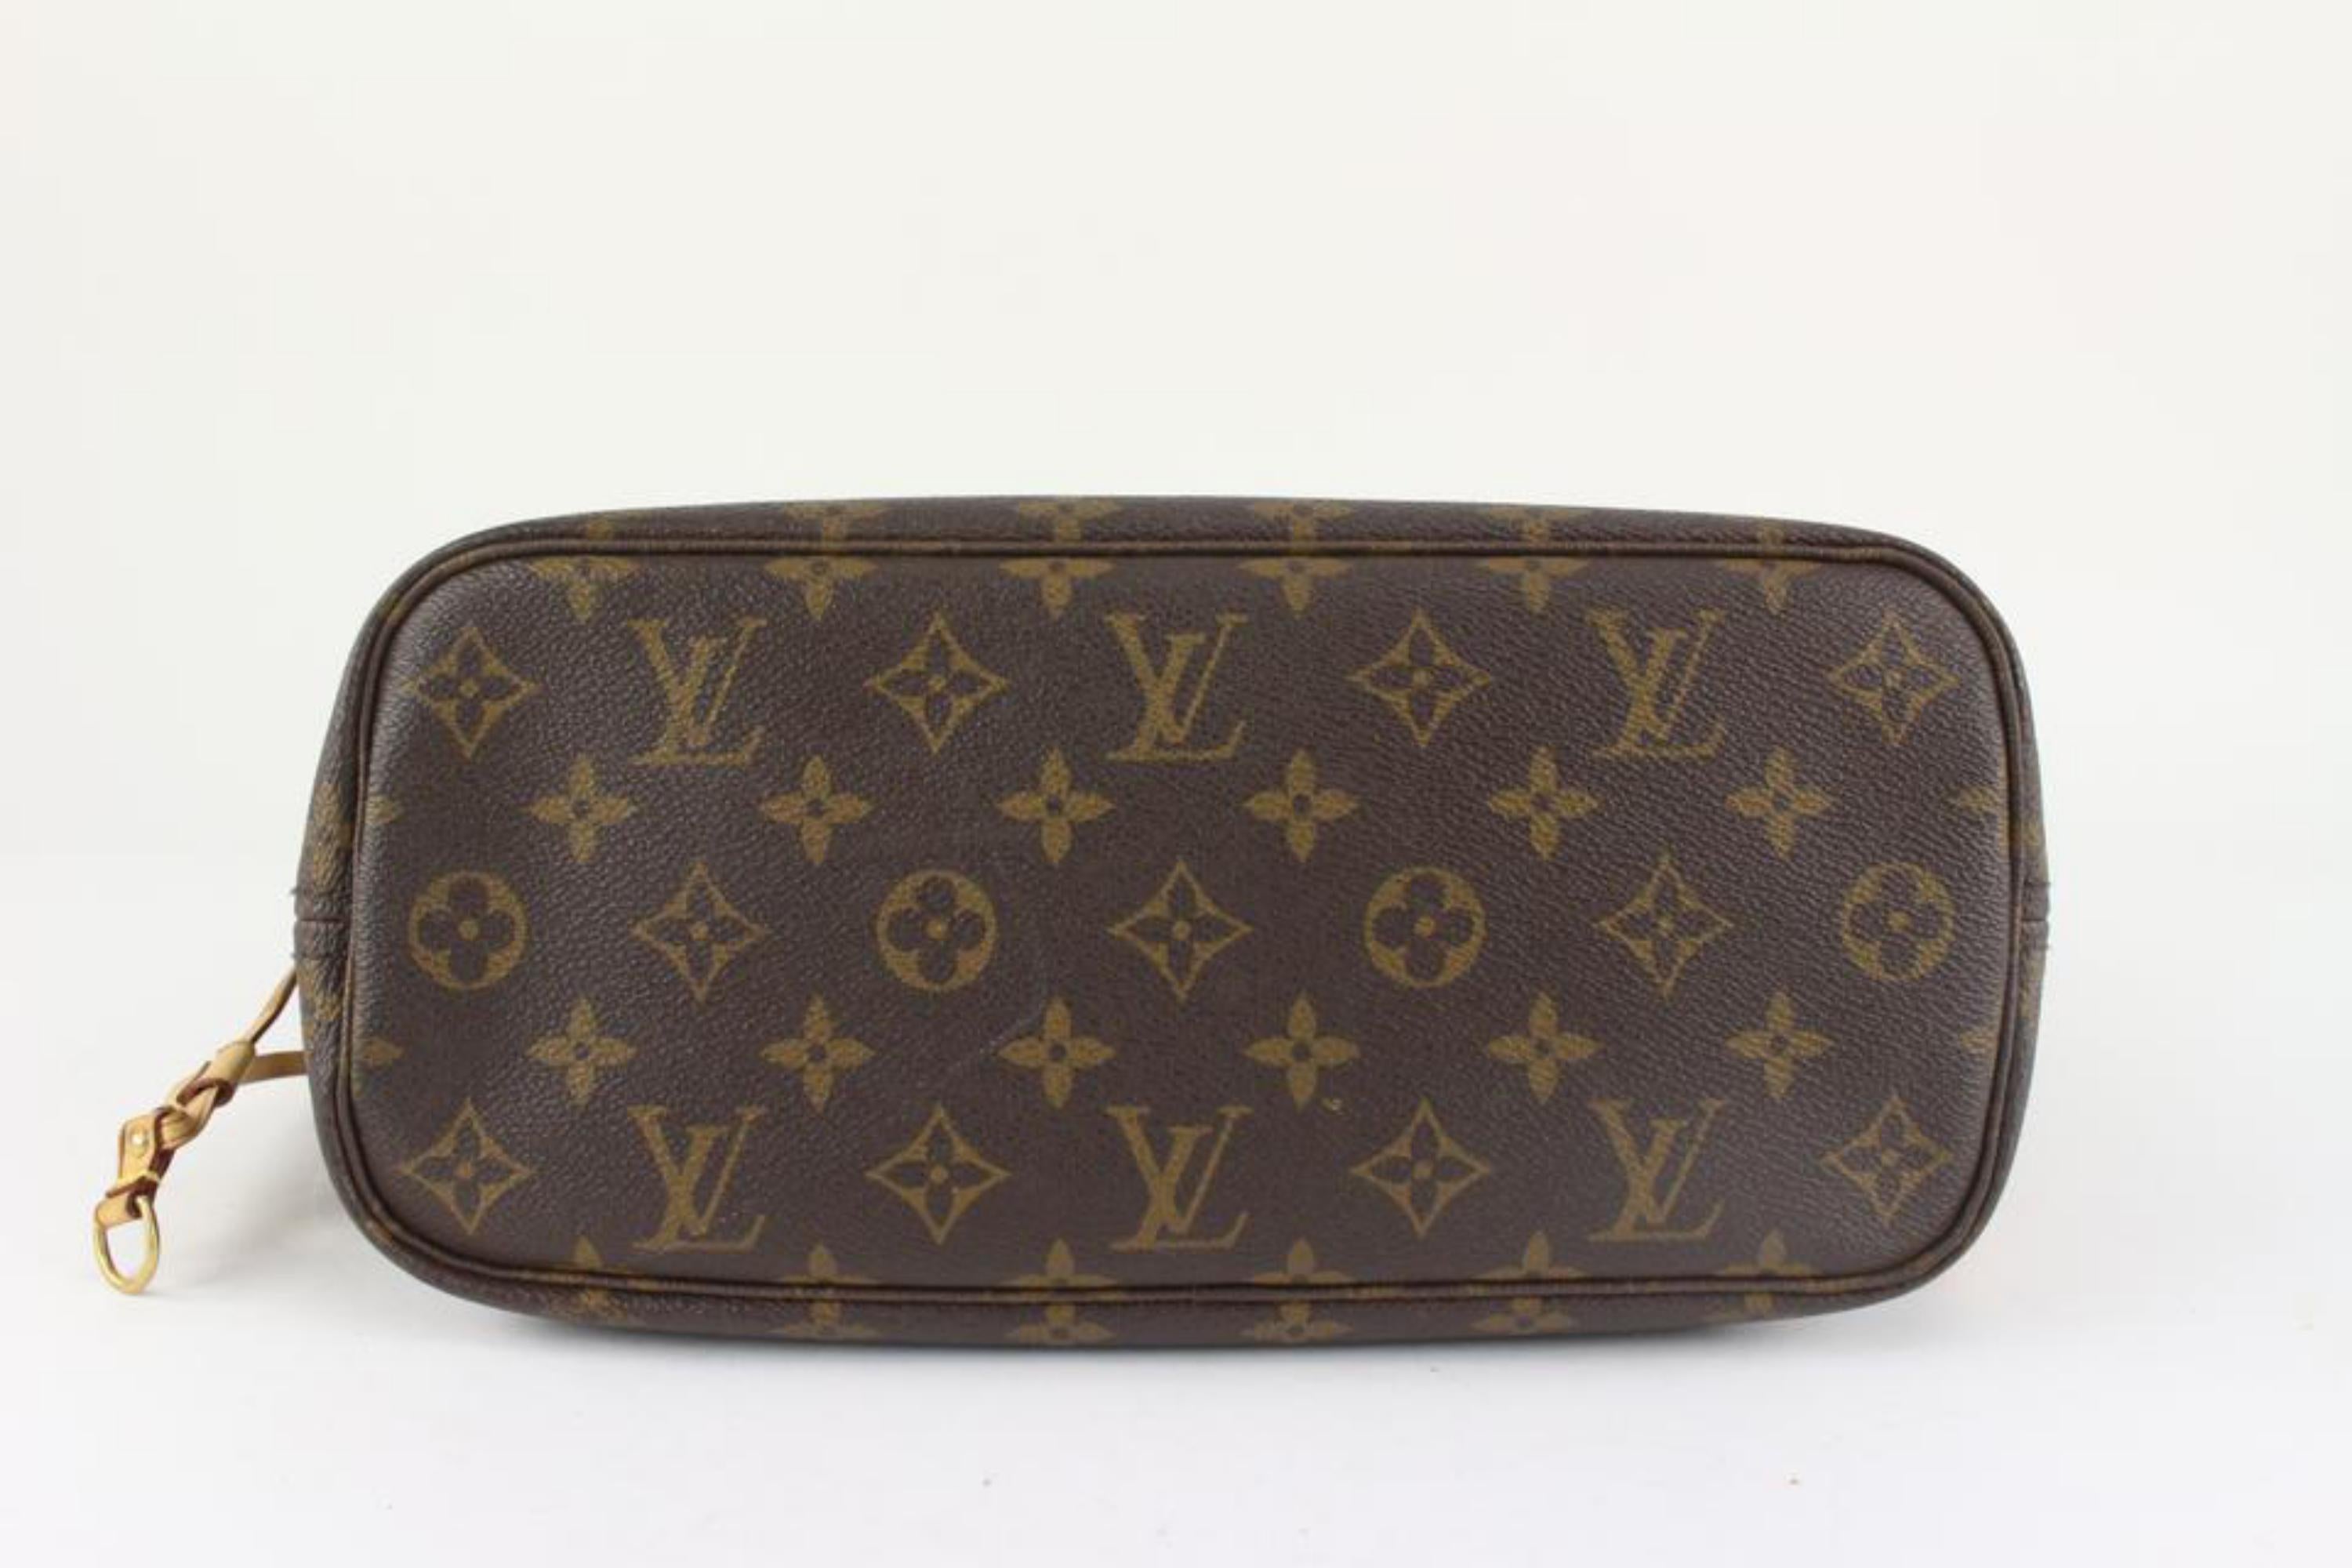 Women's Louis Vuitton Small Monogram Neverfull PM Tote Bag 1215lv6 For Sale